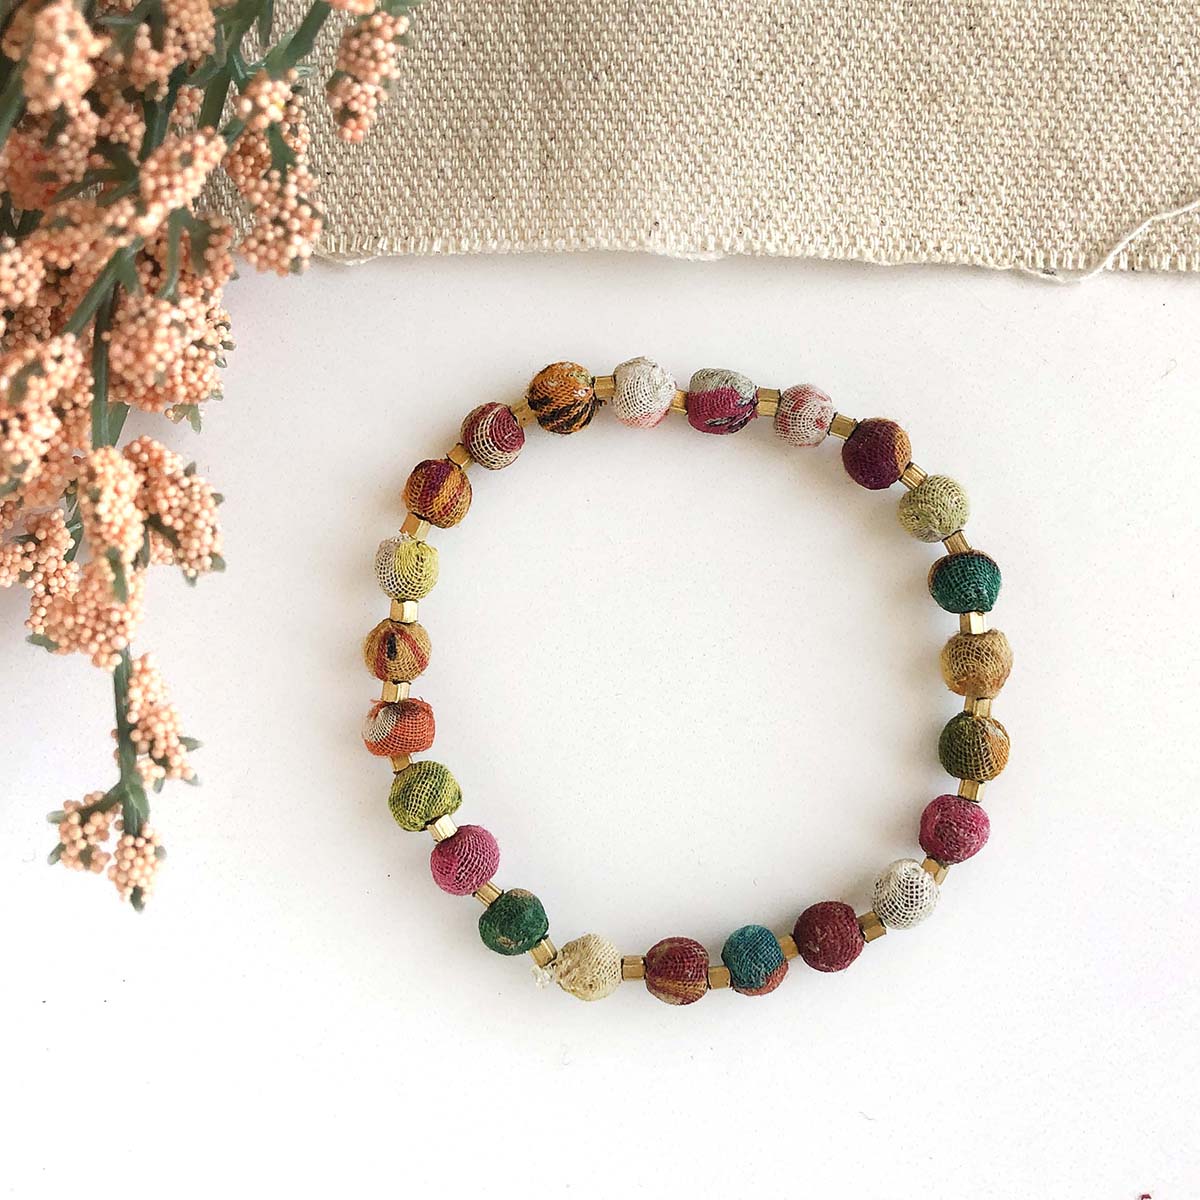 Many small textile-wrapped beads and small gold spacer beads are strung on an elastic string to form this style.